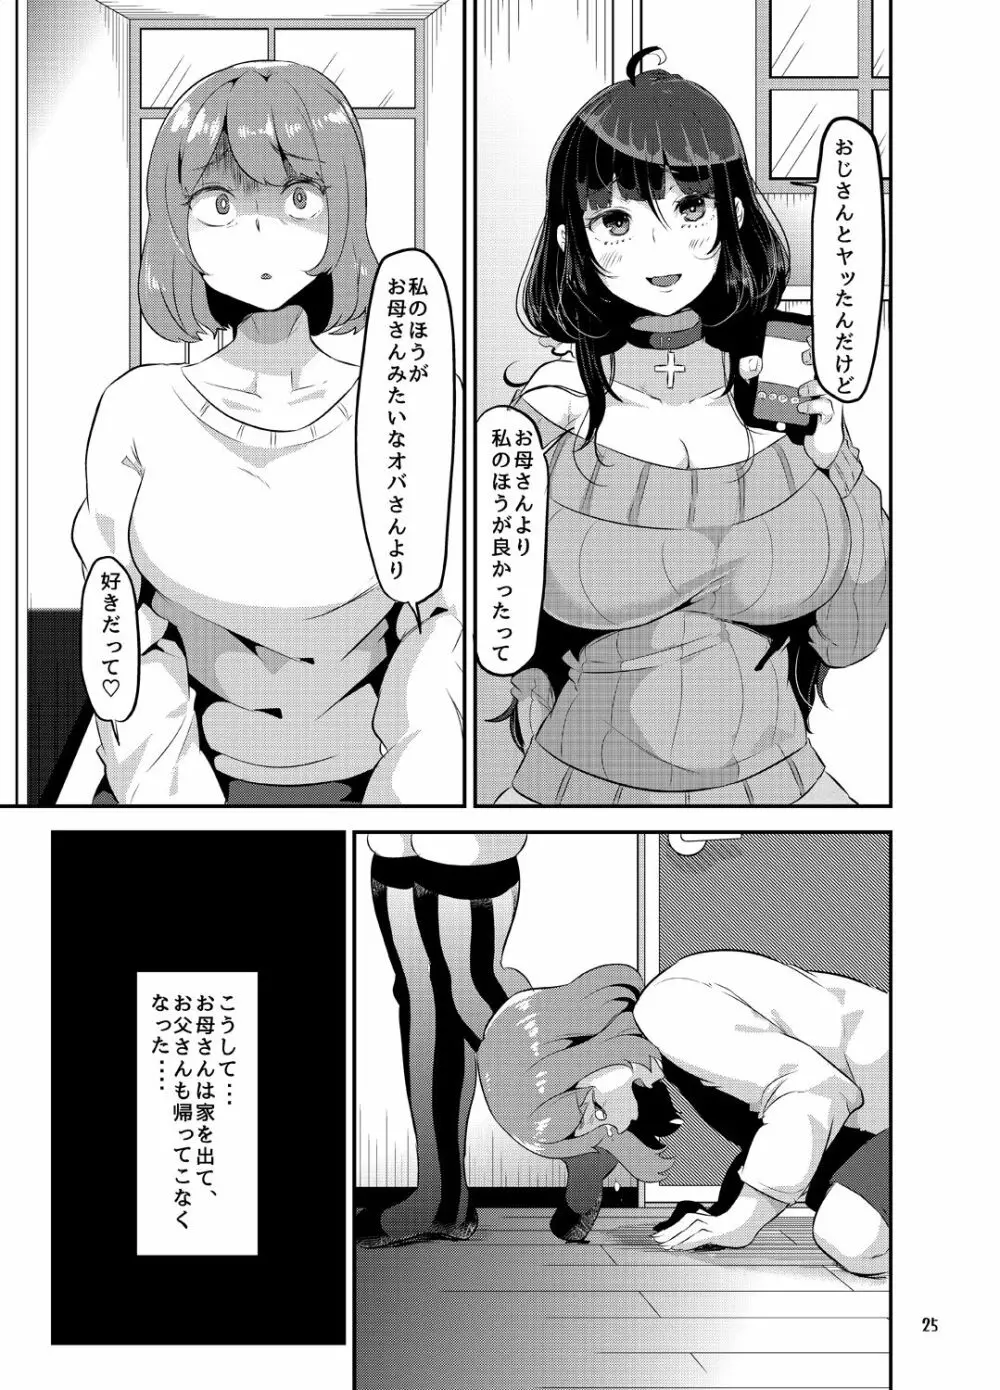 好き好き好き好き好き好き好き好き ver.4 Page.26